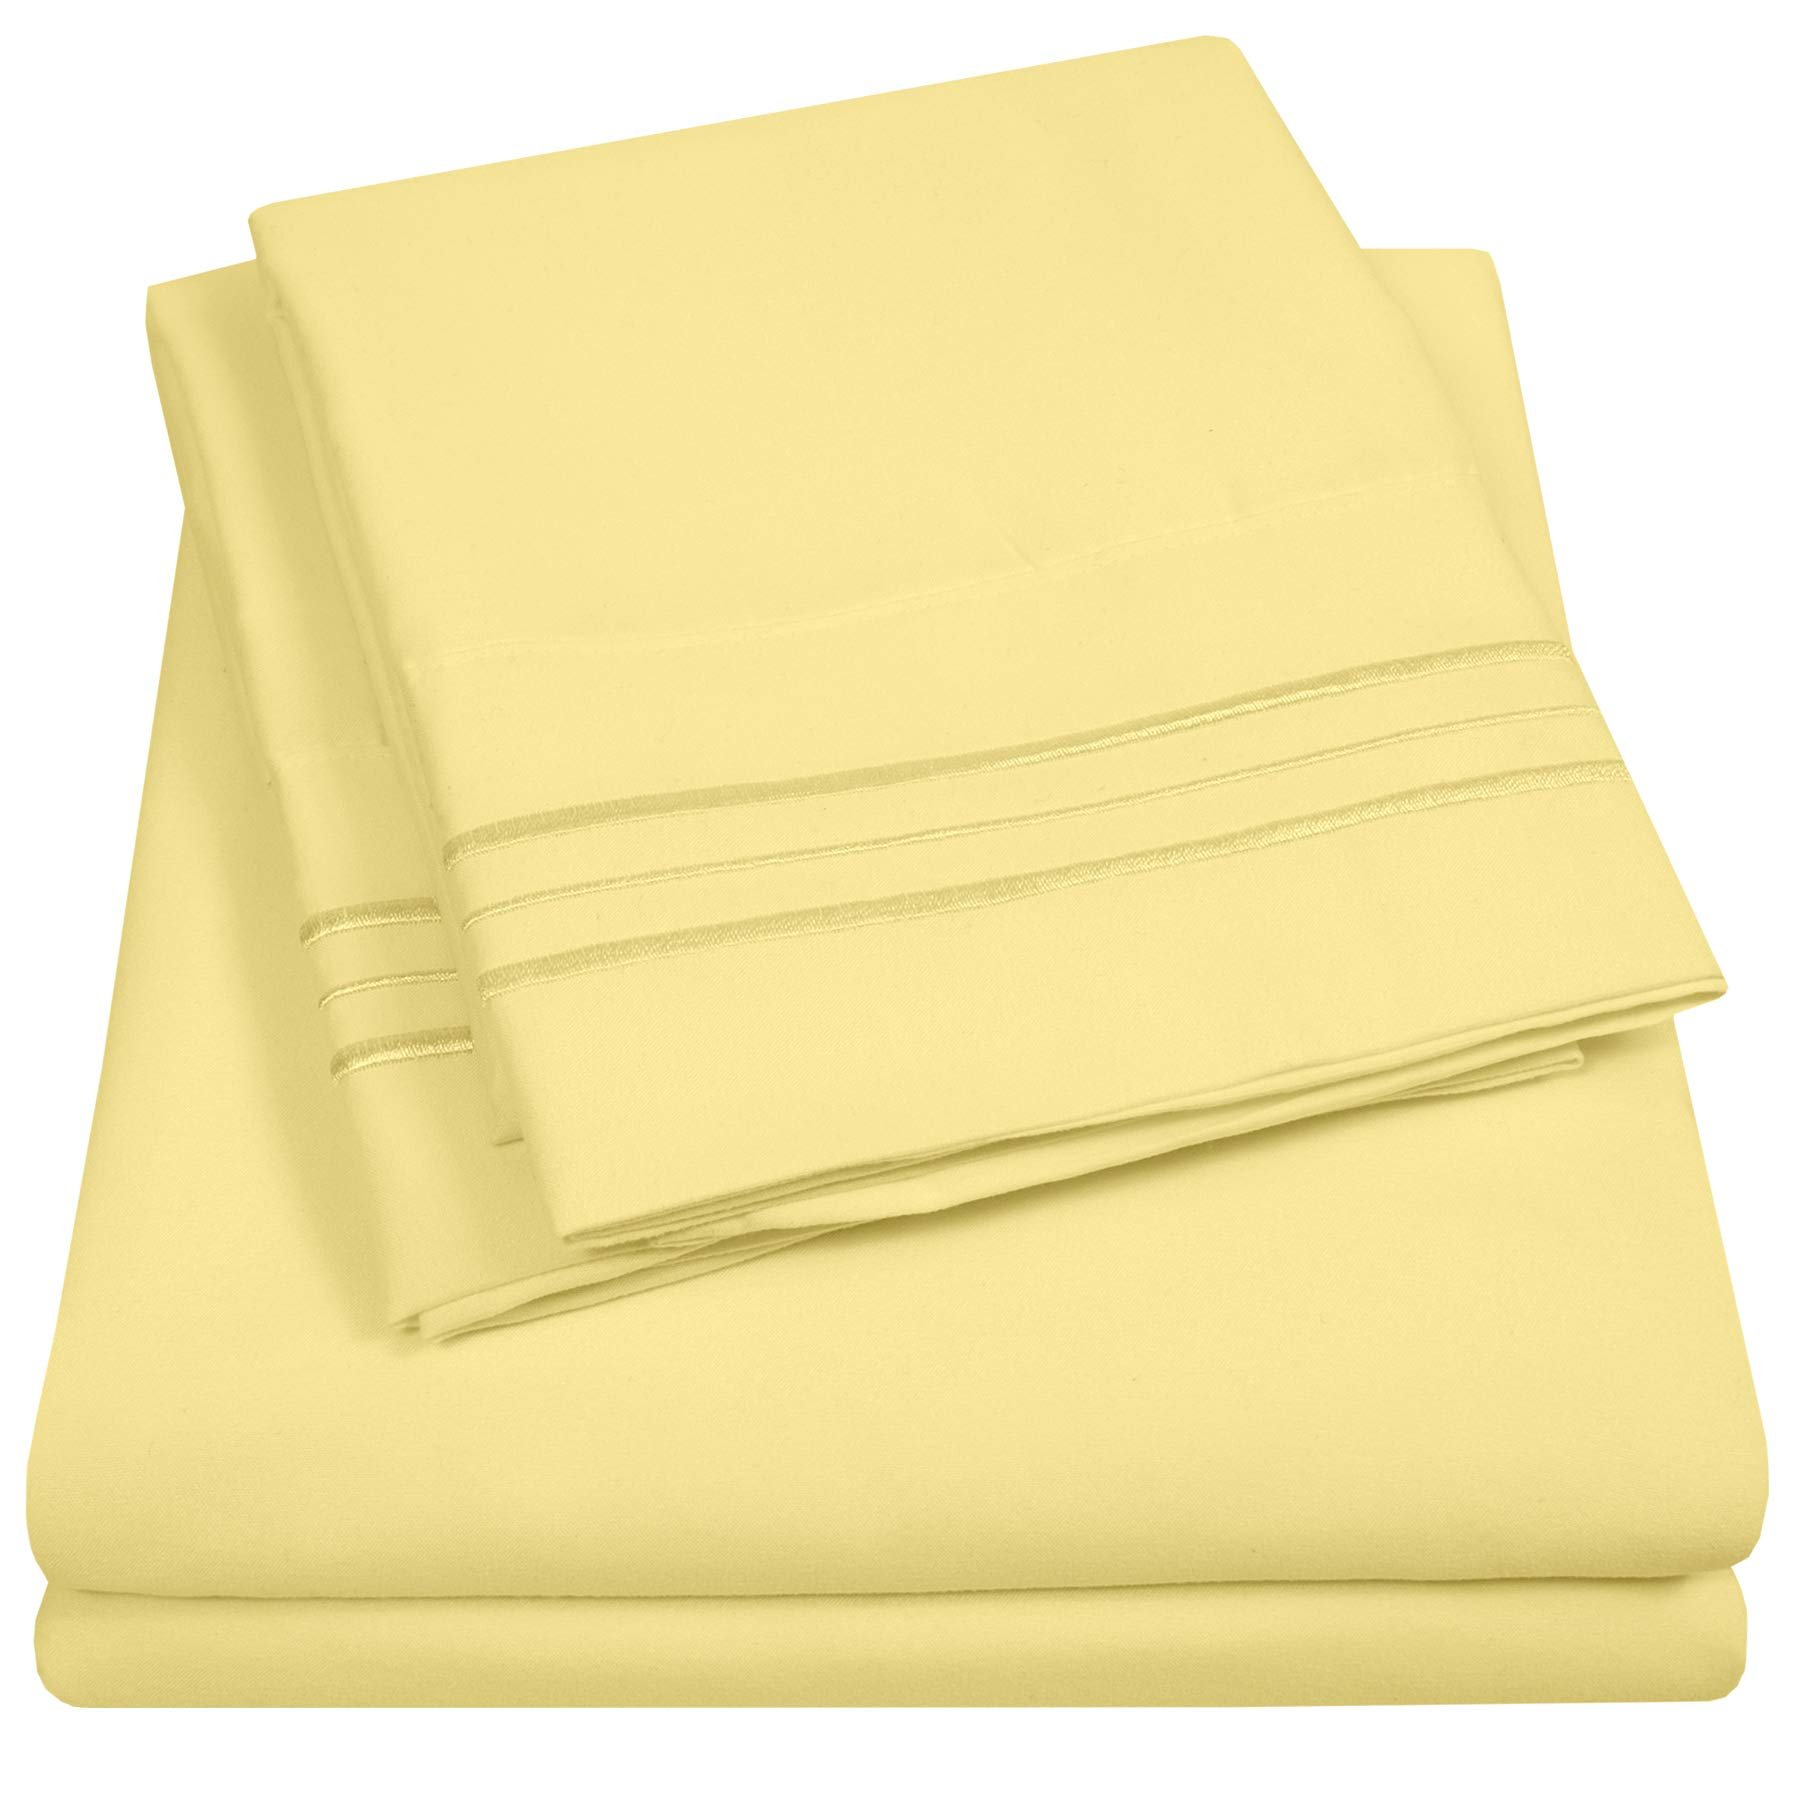 Book Cover 1500 Supreme Collection King Sheet Sets Pale Yellow - Luxury Hotel Bed Sheets and Pillowcase Set for King Mattress - Extra Soft, Elastic Corner Straps, Deep Pocket Sheets, King Pale Yellow